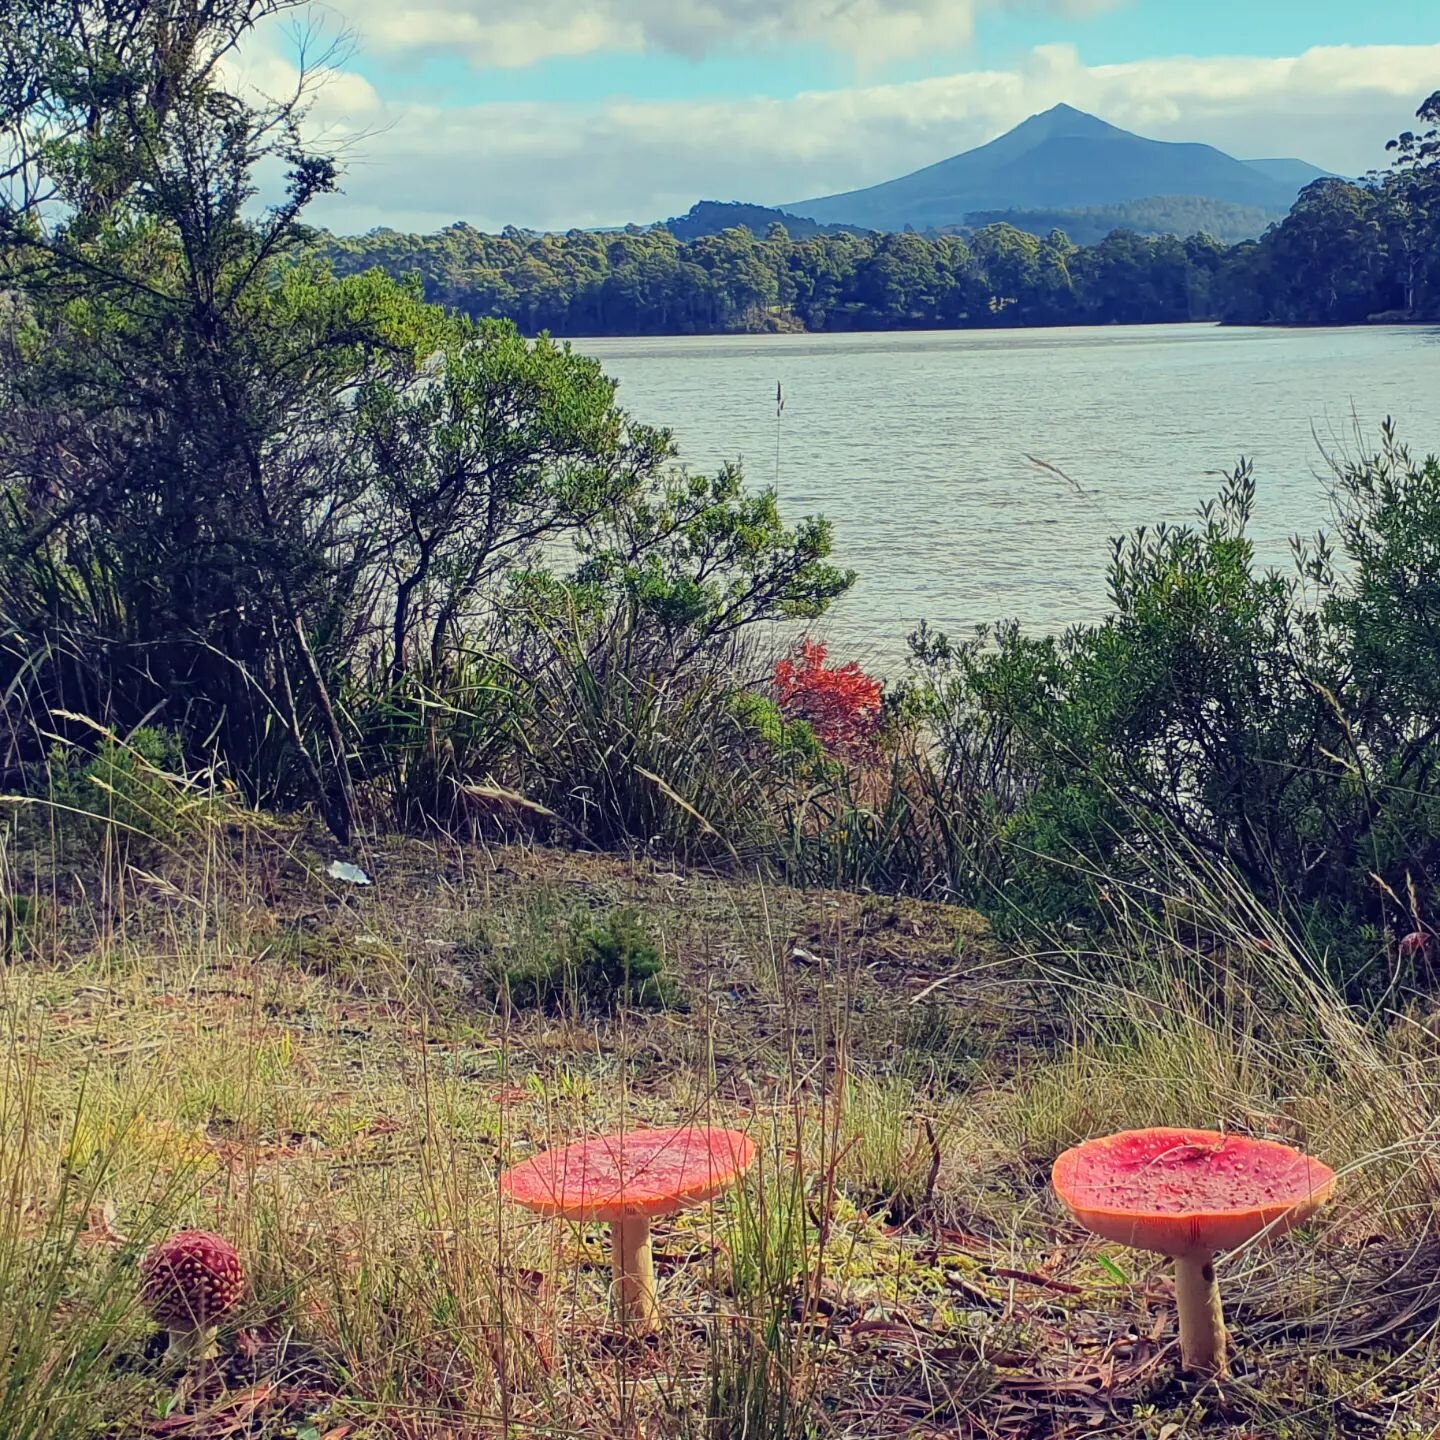 The archetypal mushroom Amanita muscaria. Photographed in Dover, on melukerdee country in lutruwita, Tasmania. Adamson's Peak in the background.

The cool crisp mornings and chill evenings of early Autumn in early April. Rather than amongst the yello